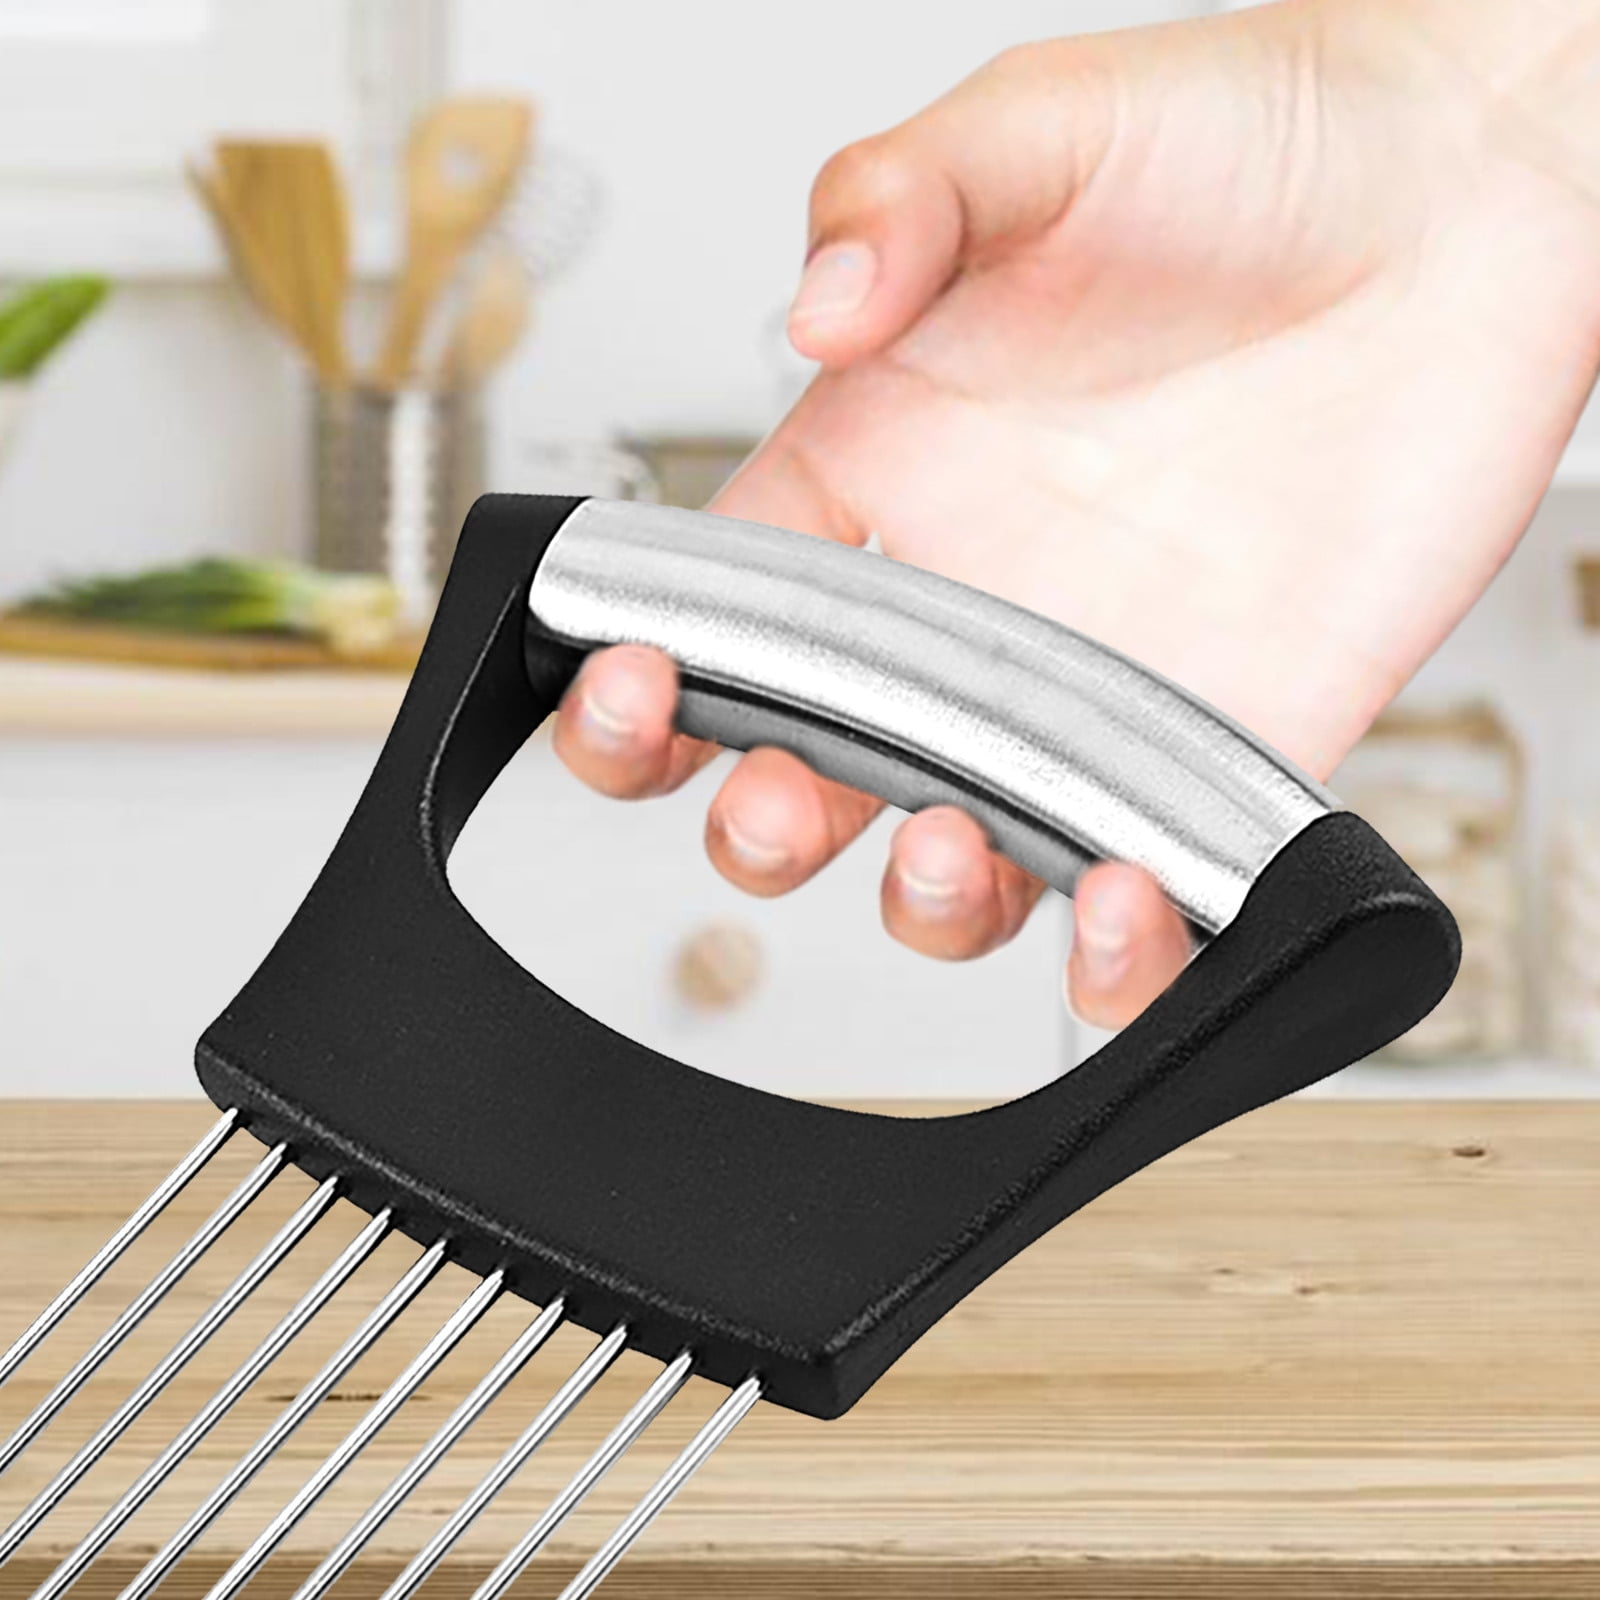  ENDLILI Stainless Steel Onion Holder for Slicing  Multifunctional Onion Holder Slices Food Slicer Assistant,suitable for  Vegetable Tomato Potato Meat Onion Cutter Tool Kitchen Gadgets (black):  Home & Kitchen